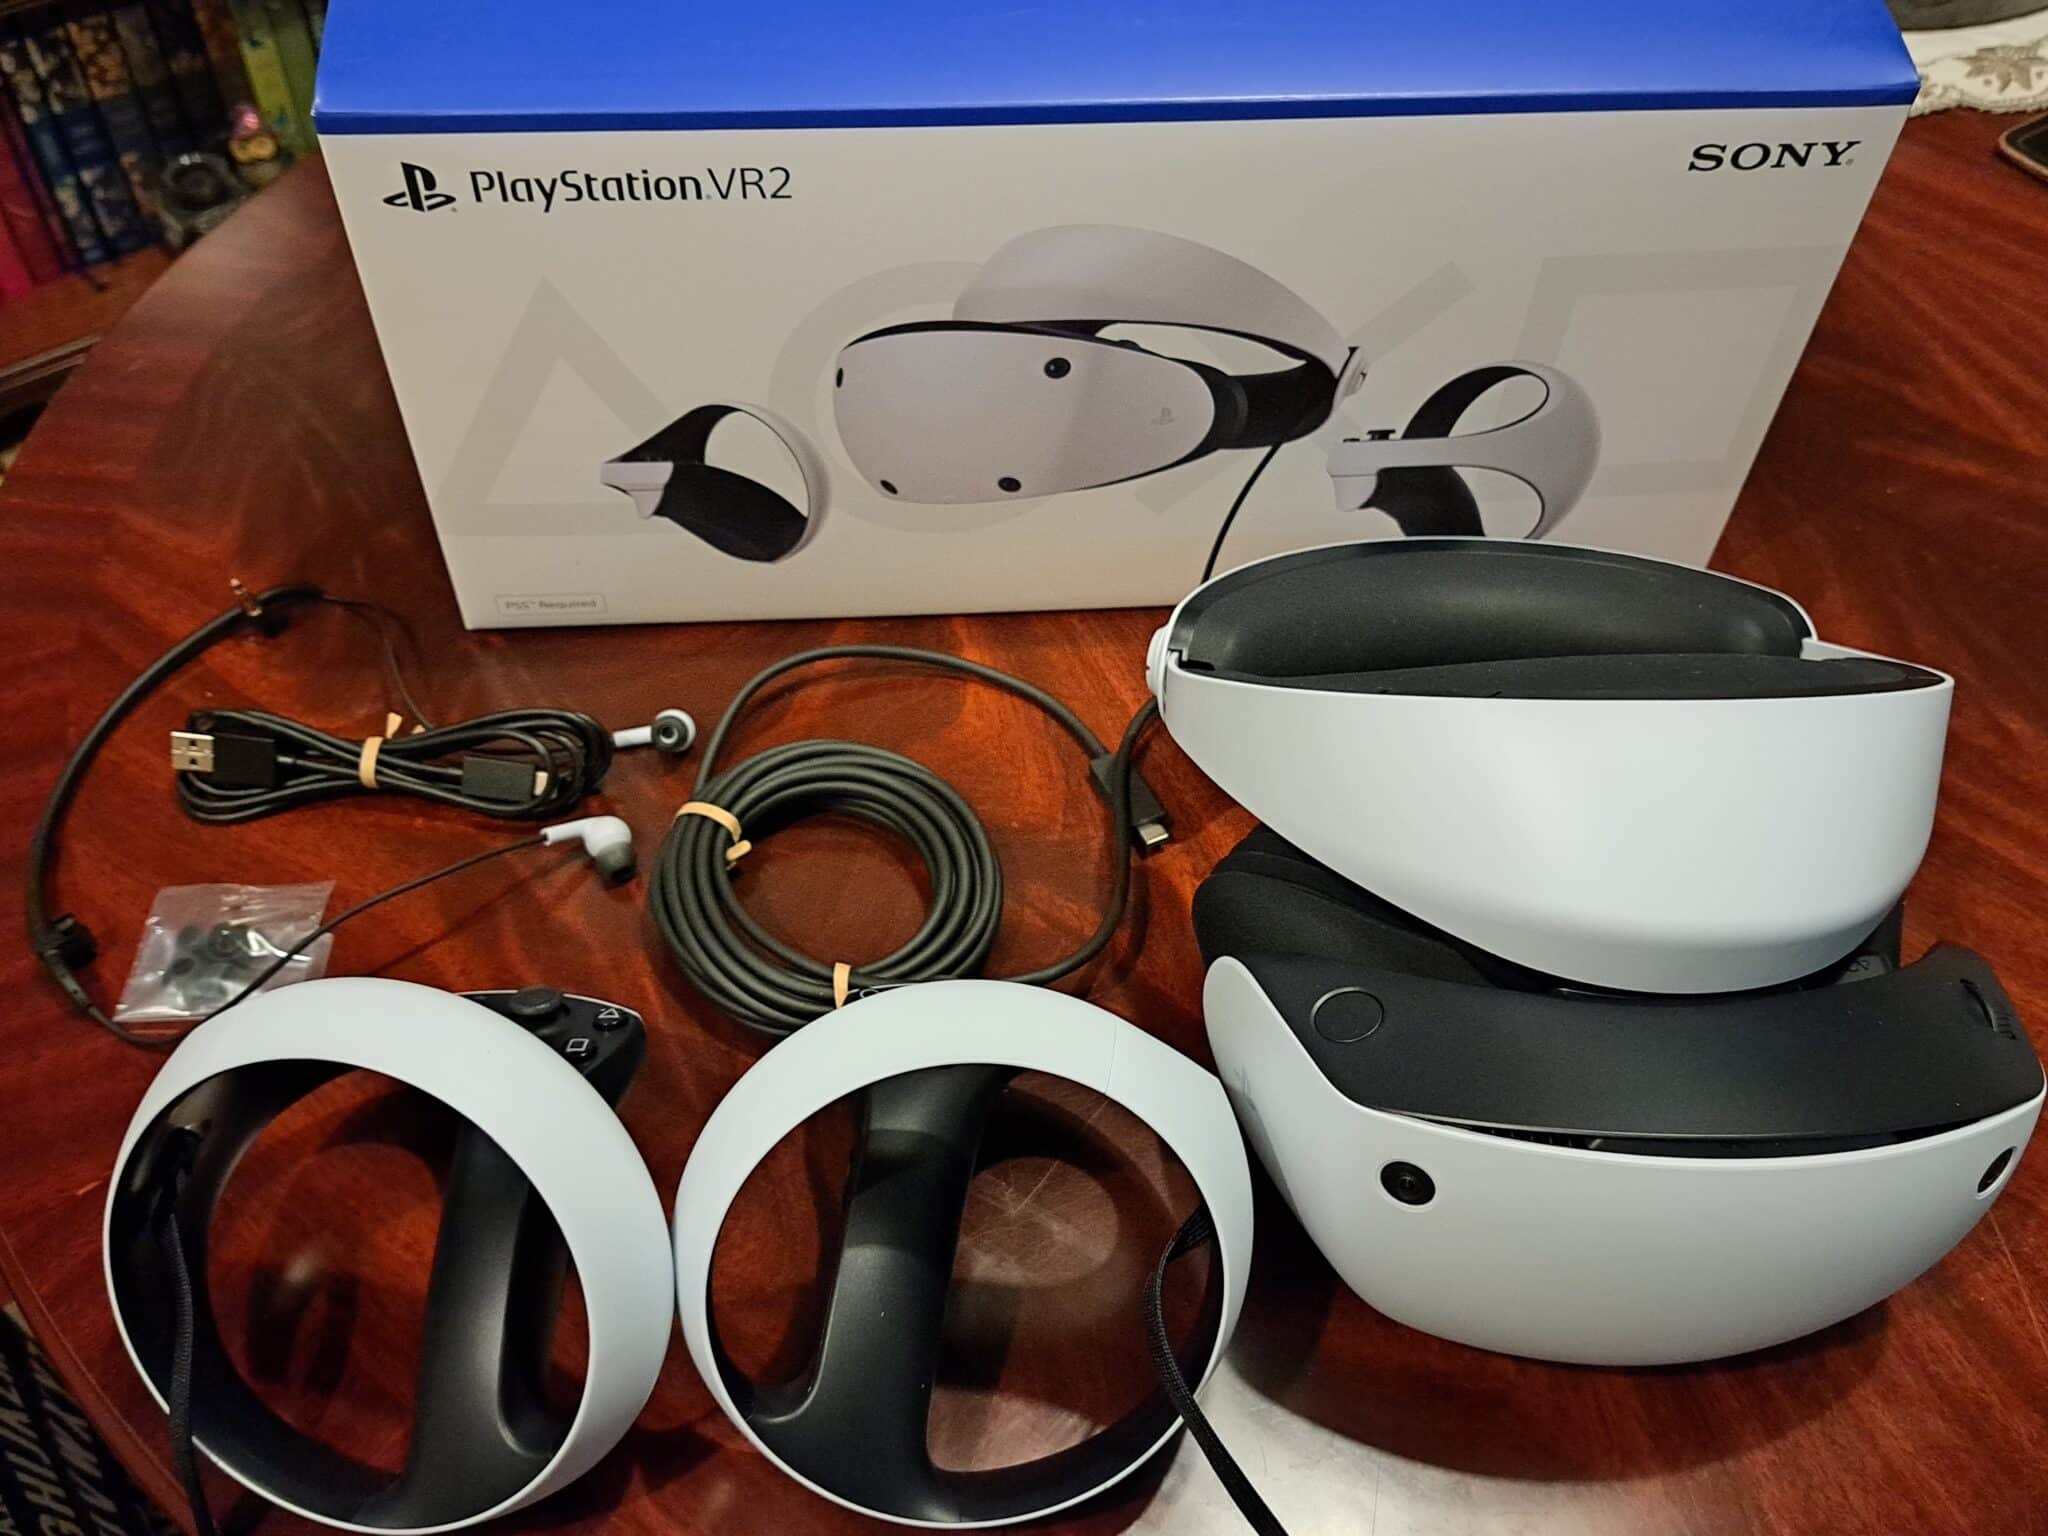 PS VR2 hardware review: After 2 weeks of use